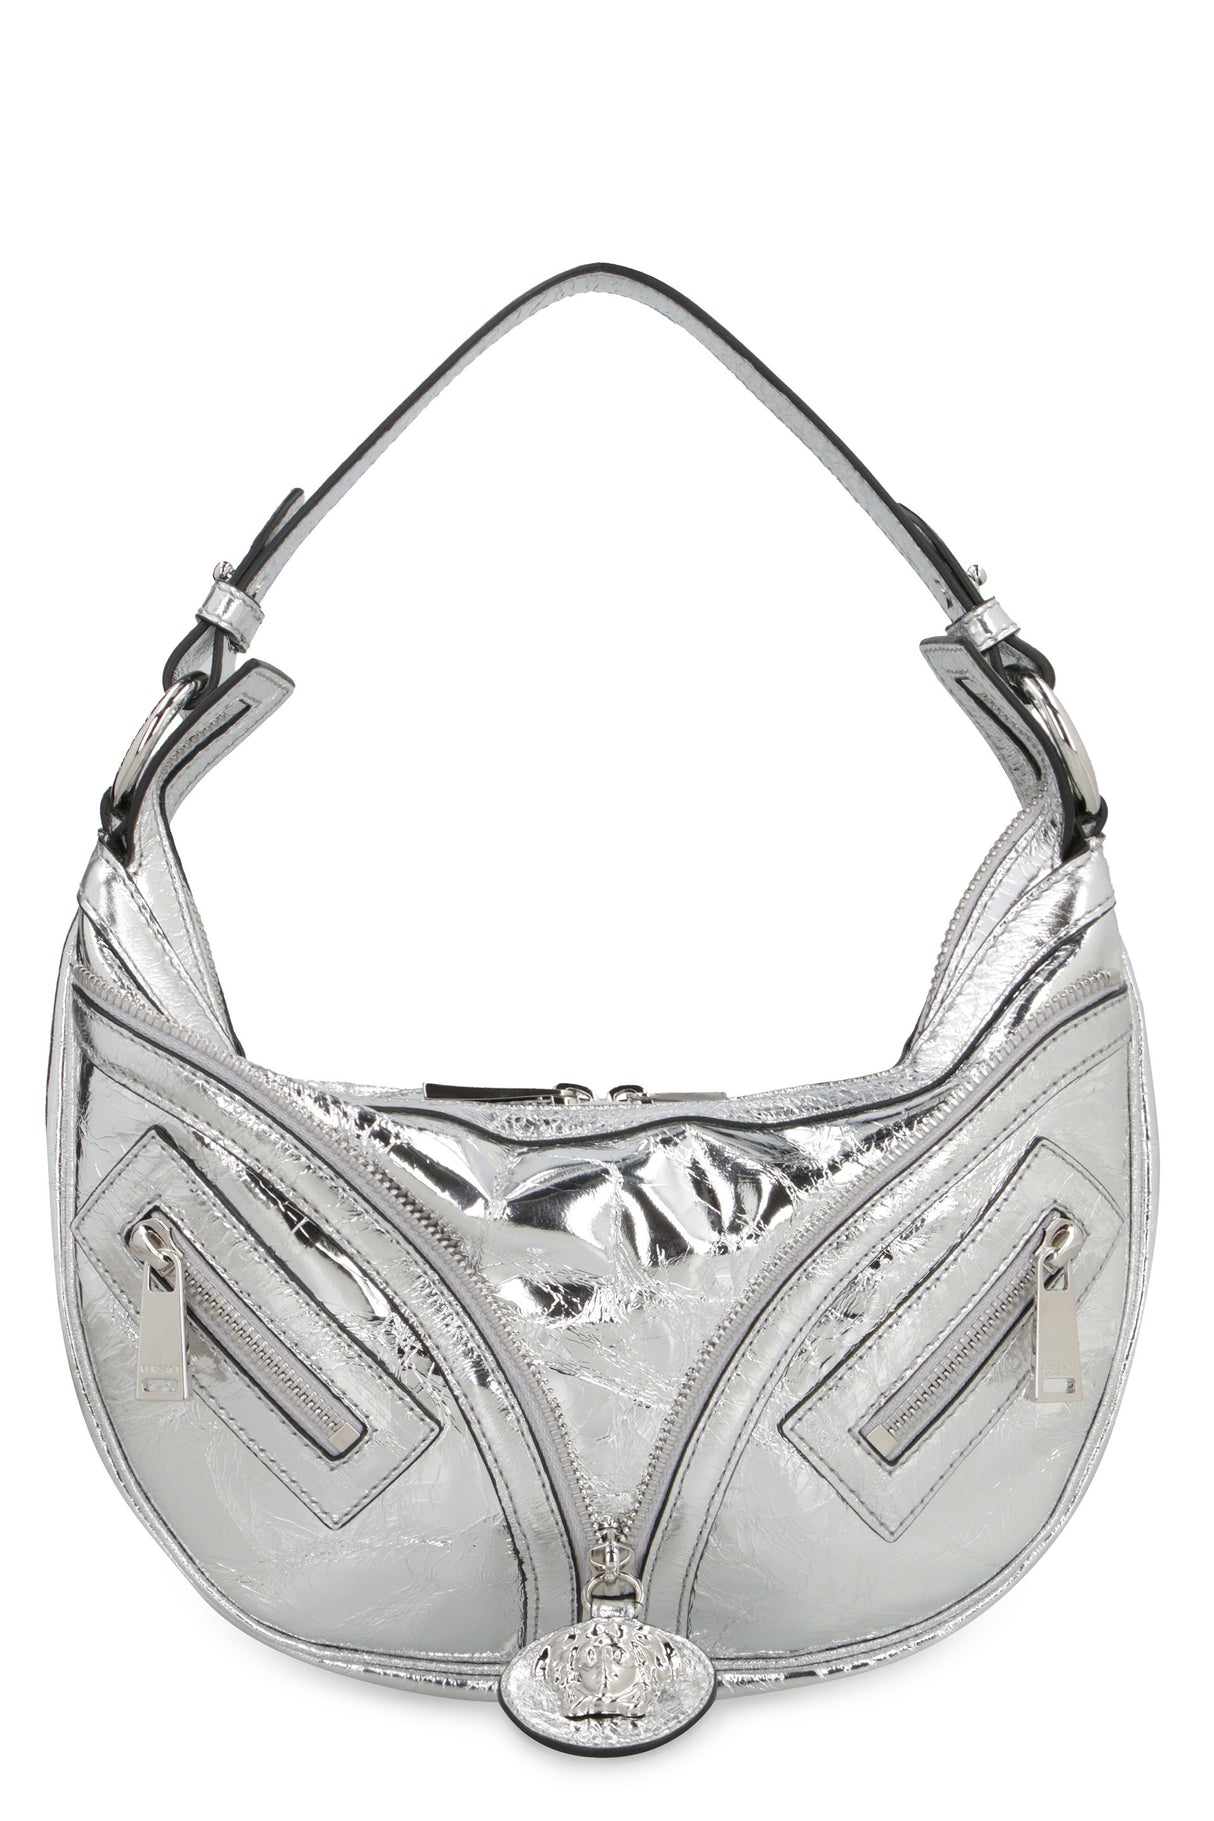 VERSACE Metallic Leather Shoulder Handbag with Medusa Charm and Silver-Tone Hardware for Women